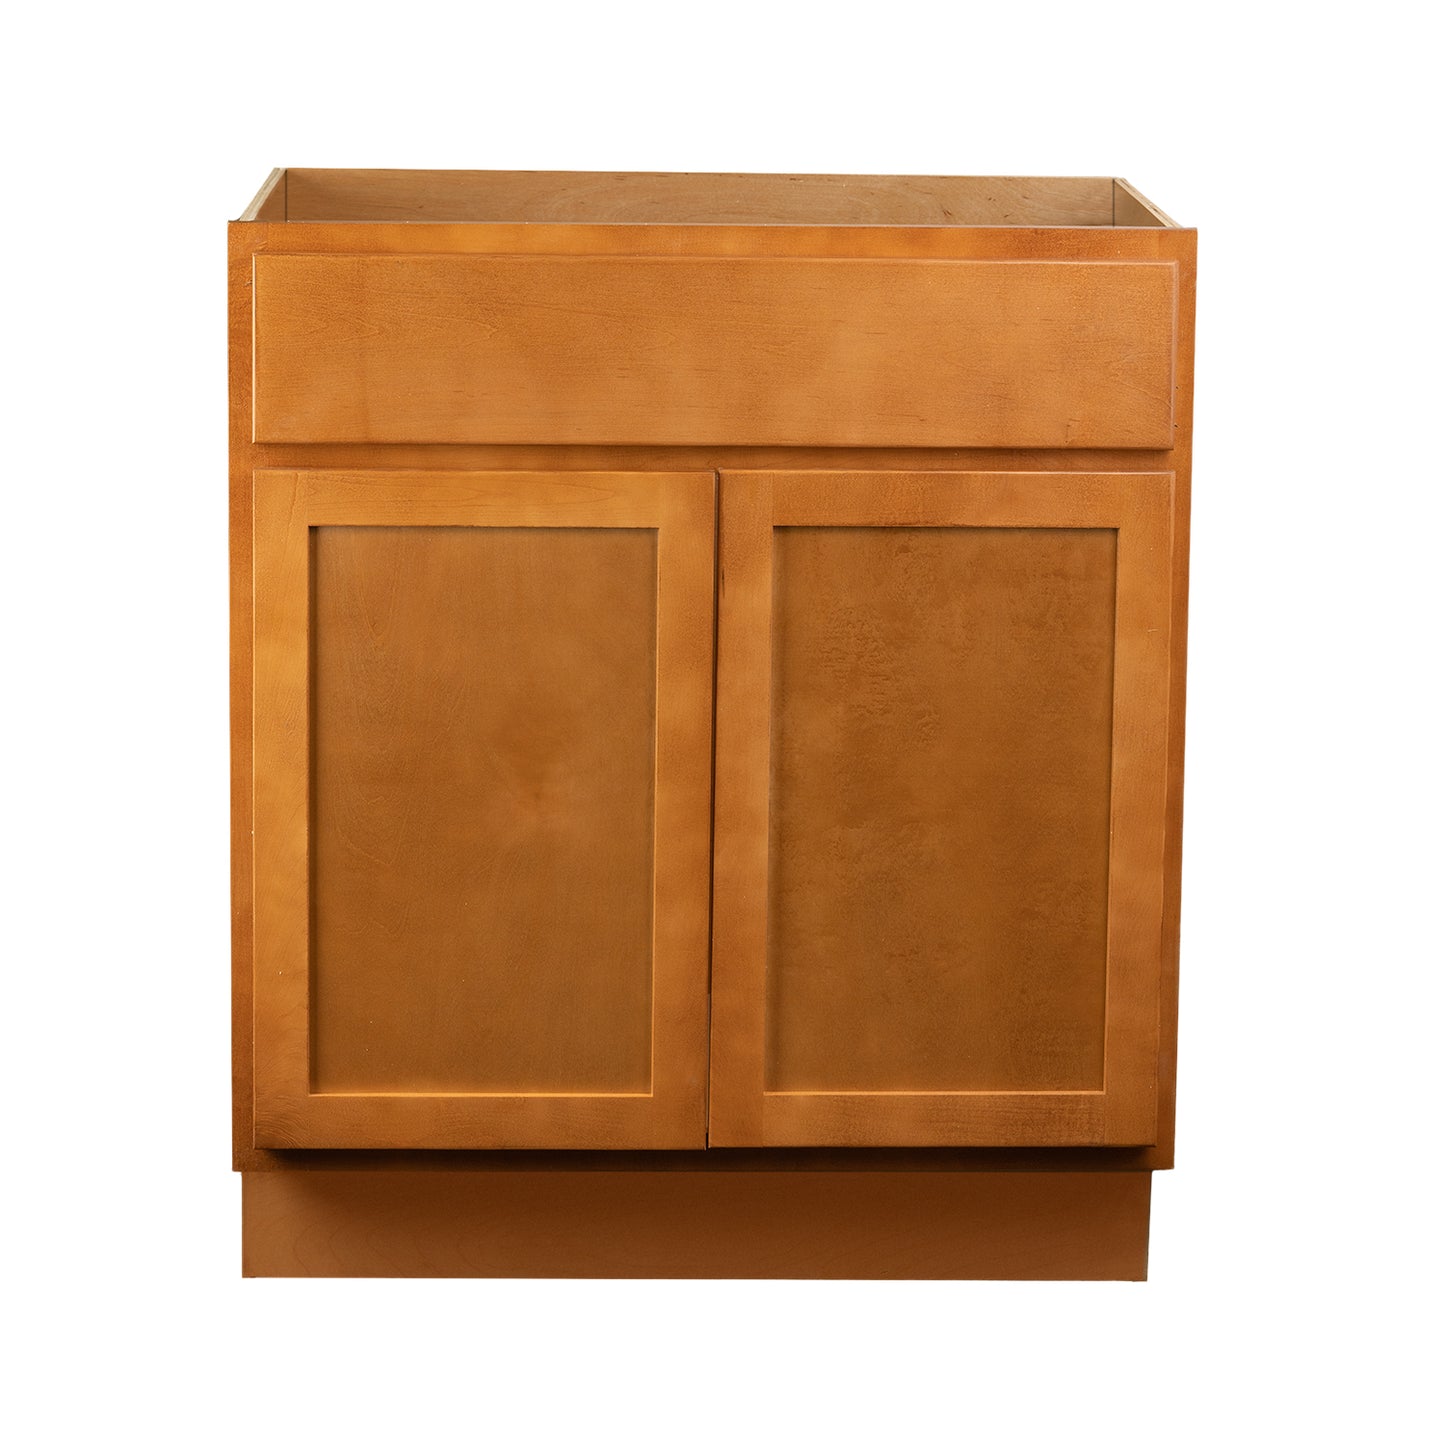 Quicklock RTA (Ready-to-Assemble) Provincial Stain Vanity Base Cabinet | 30"Wx34.5"Hx18"D